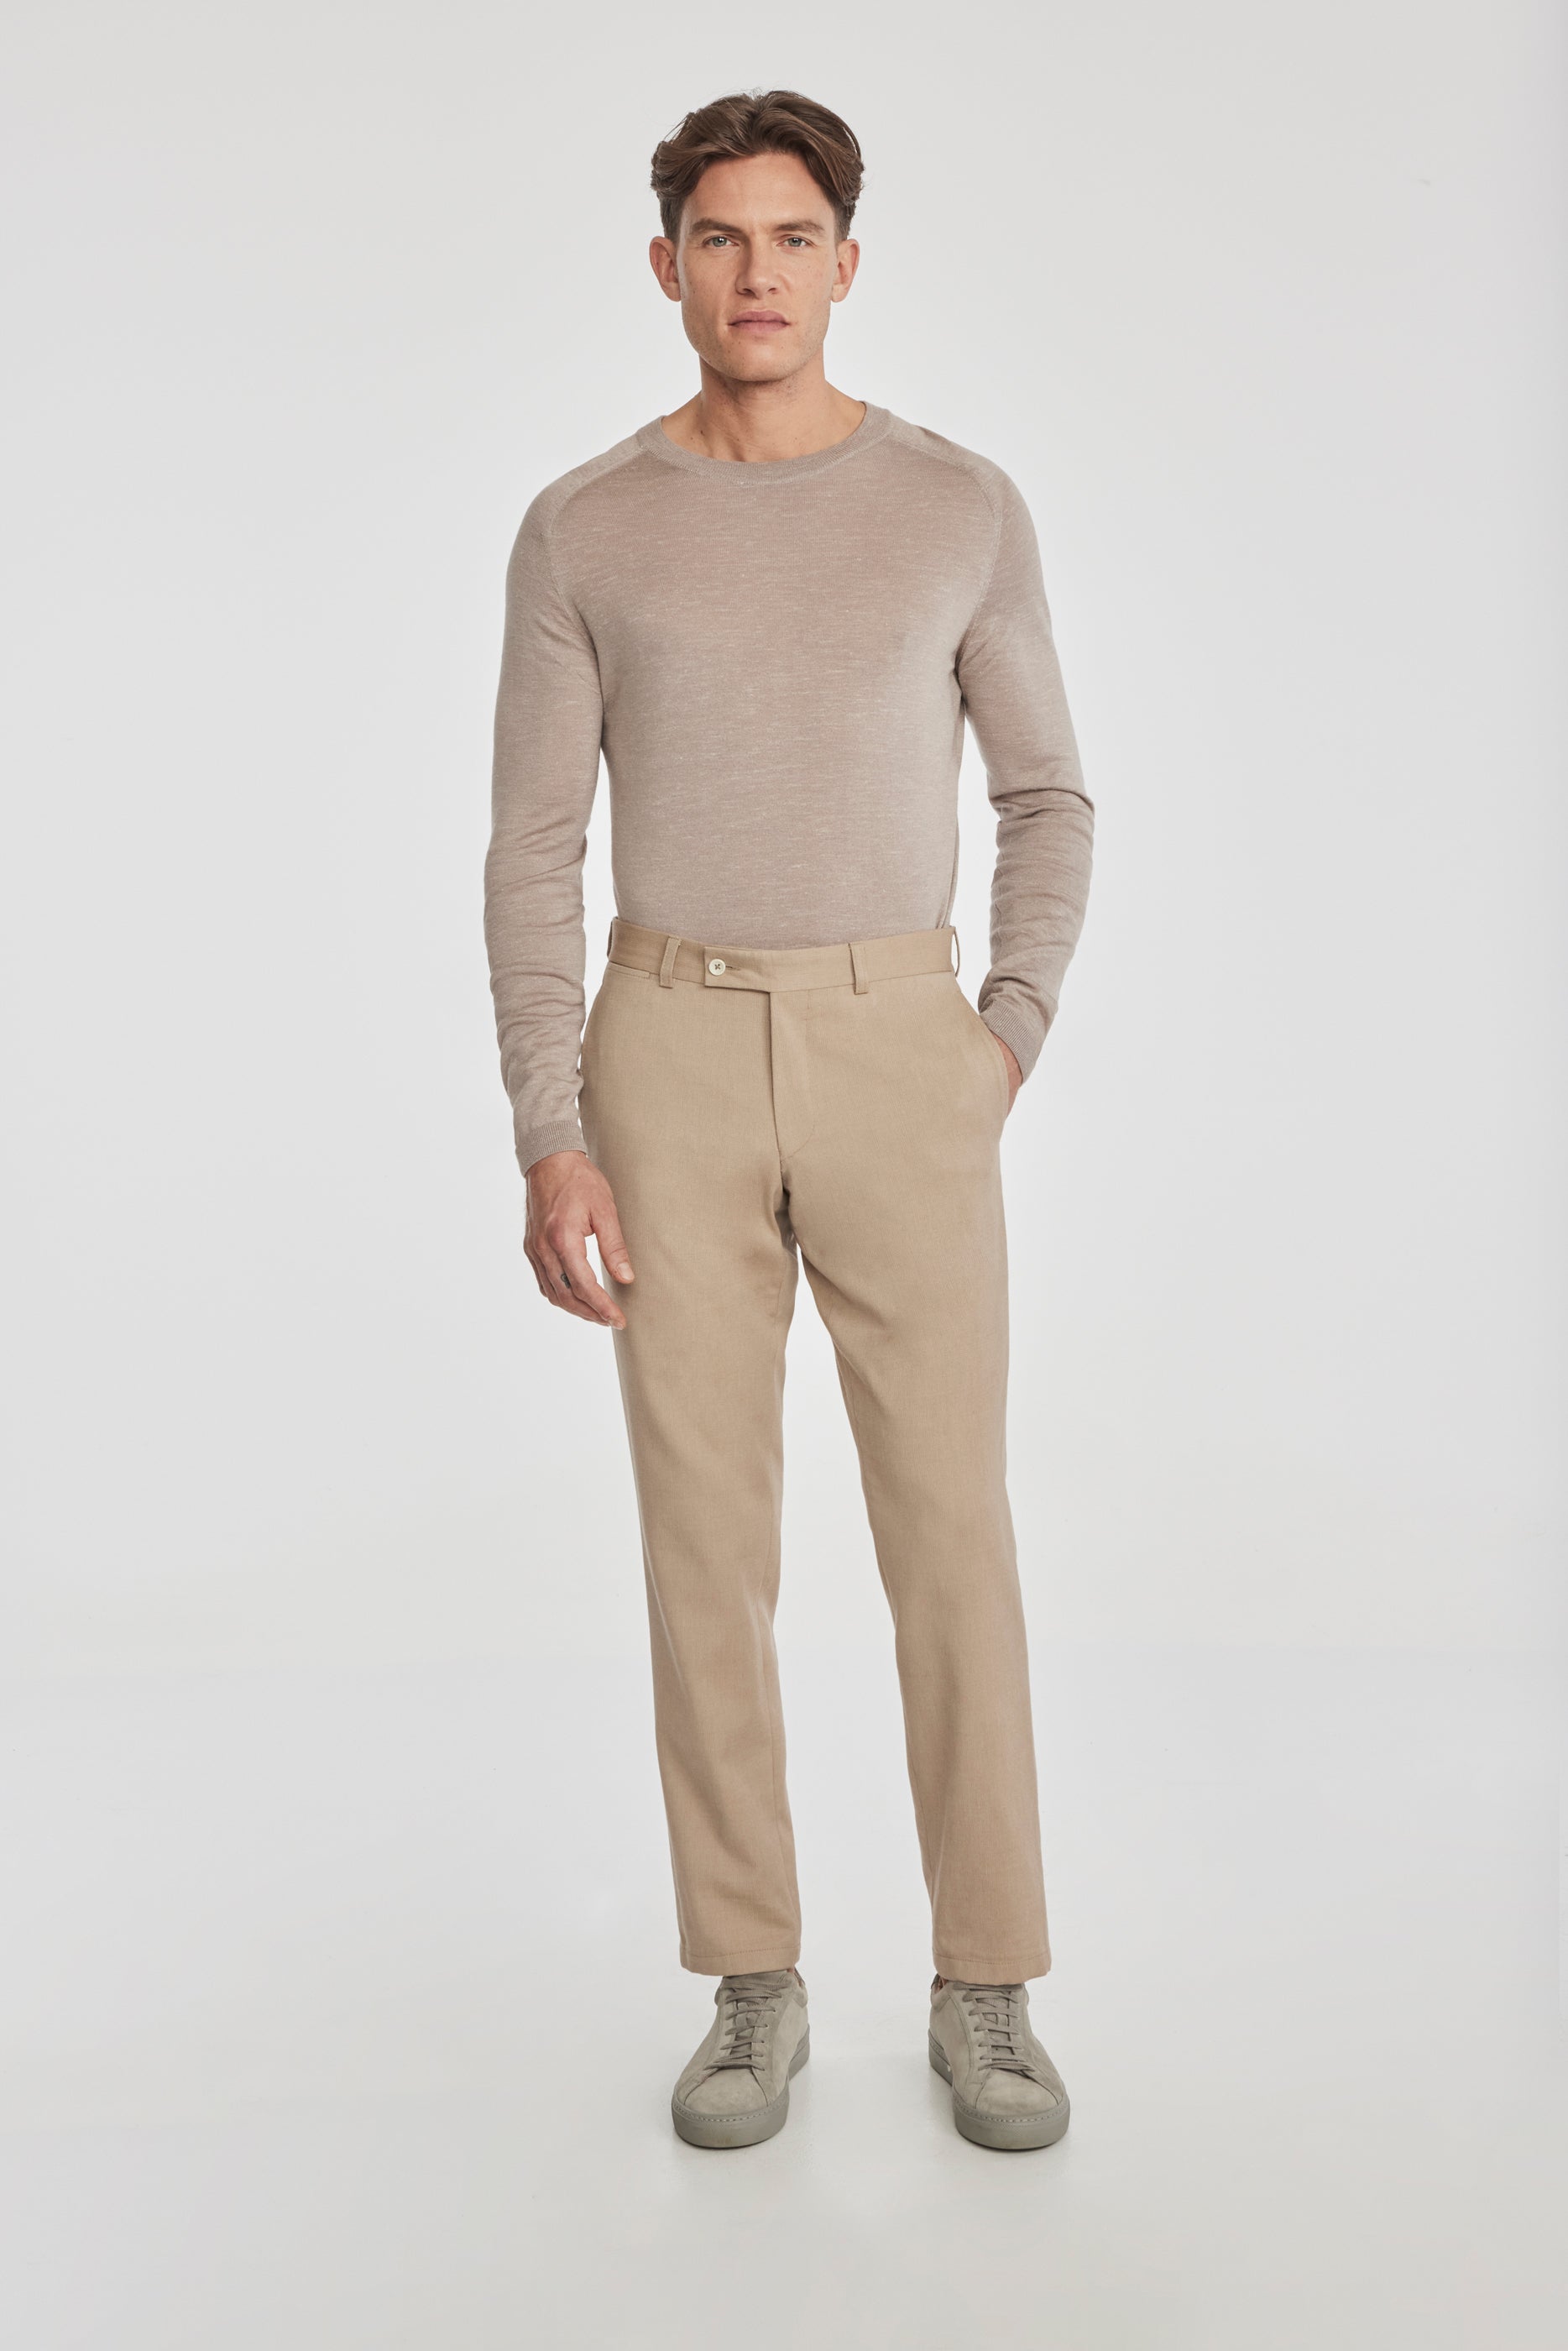 Alt view 1 Palmer Textured Cotton, Wool Stretch Trouser in Tan